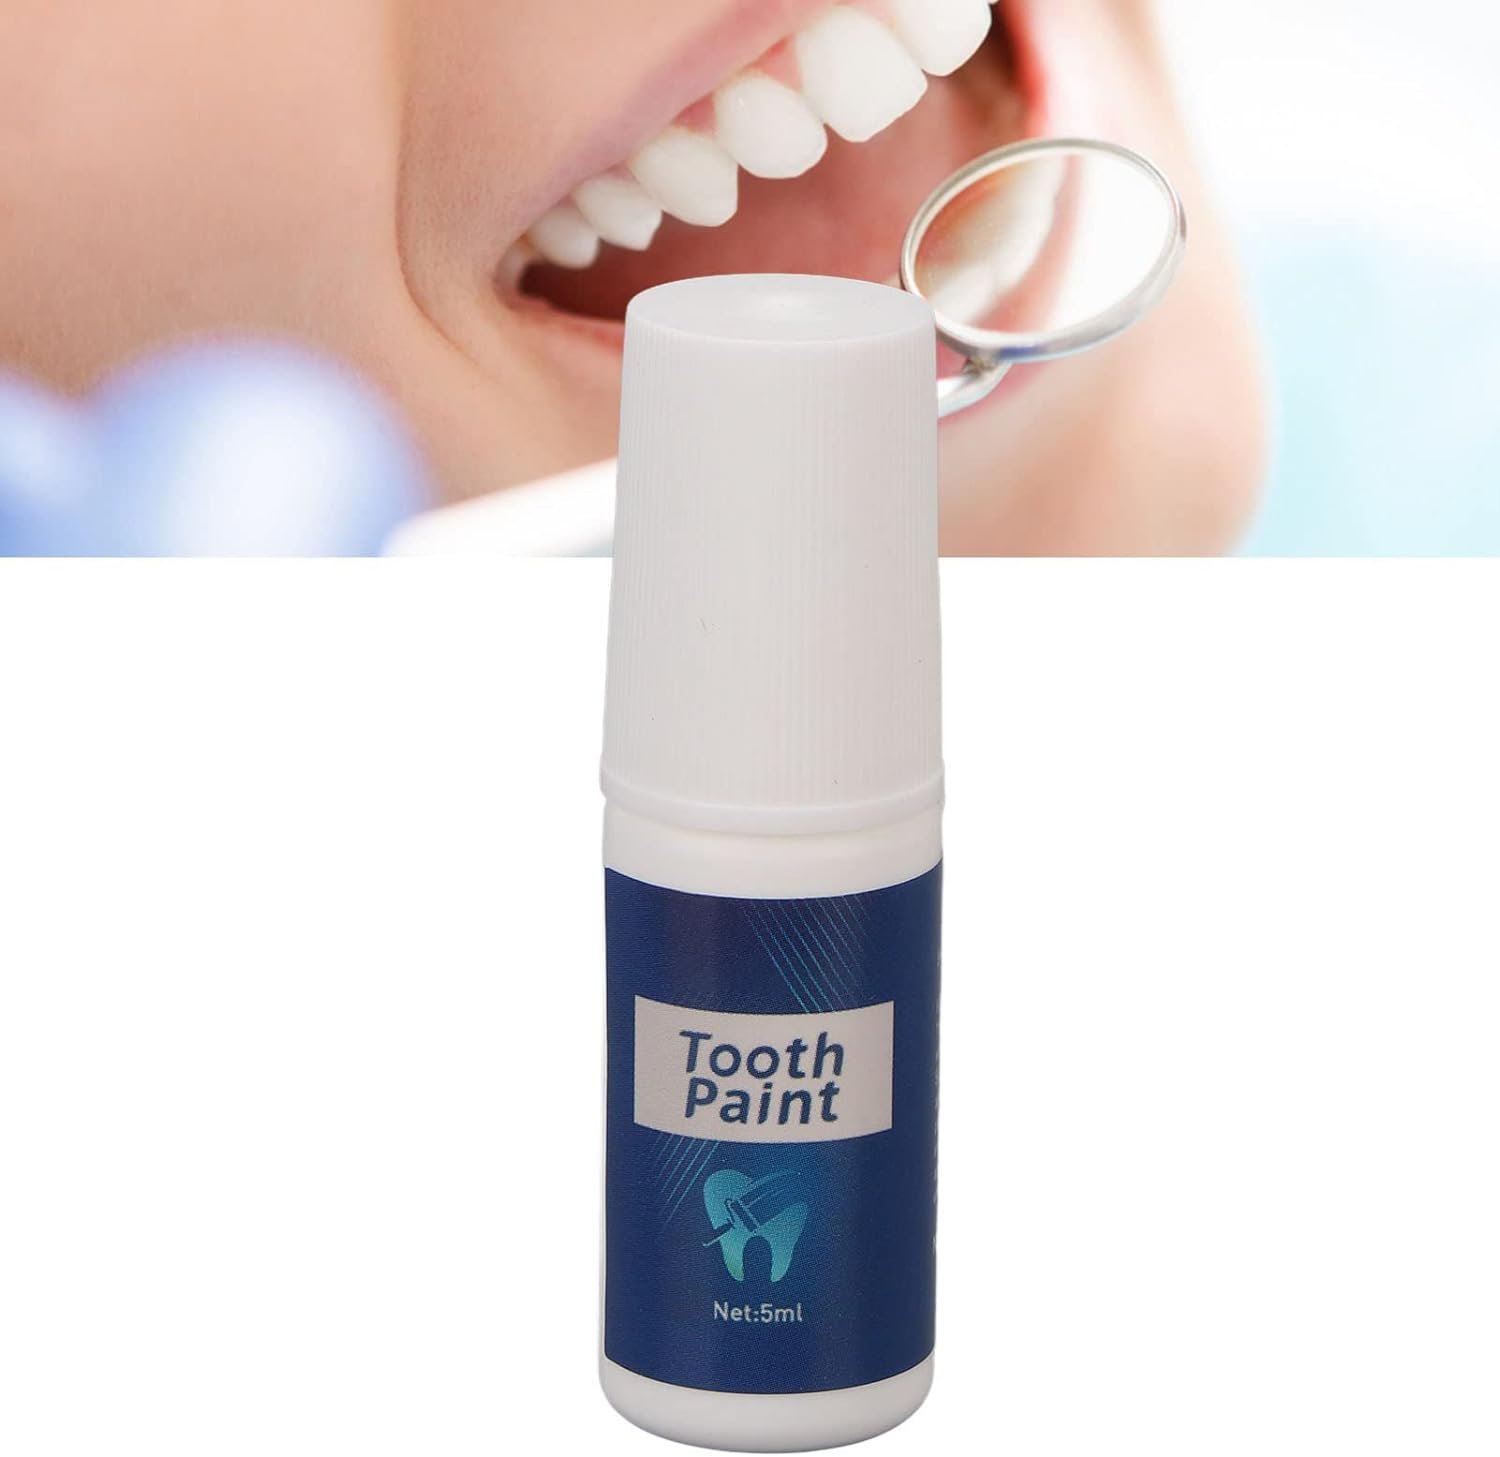 Teeth Whitening Pen,Teeth Whitening Paint, Tooth Paint,Instant Teeth Whitening Paint,Tooth Polish Uptight White,Oral Cleaning Beauty Tooth Paint for Removiing Yellow Stains 5ML